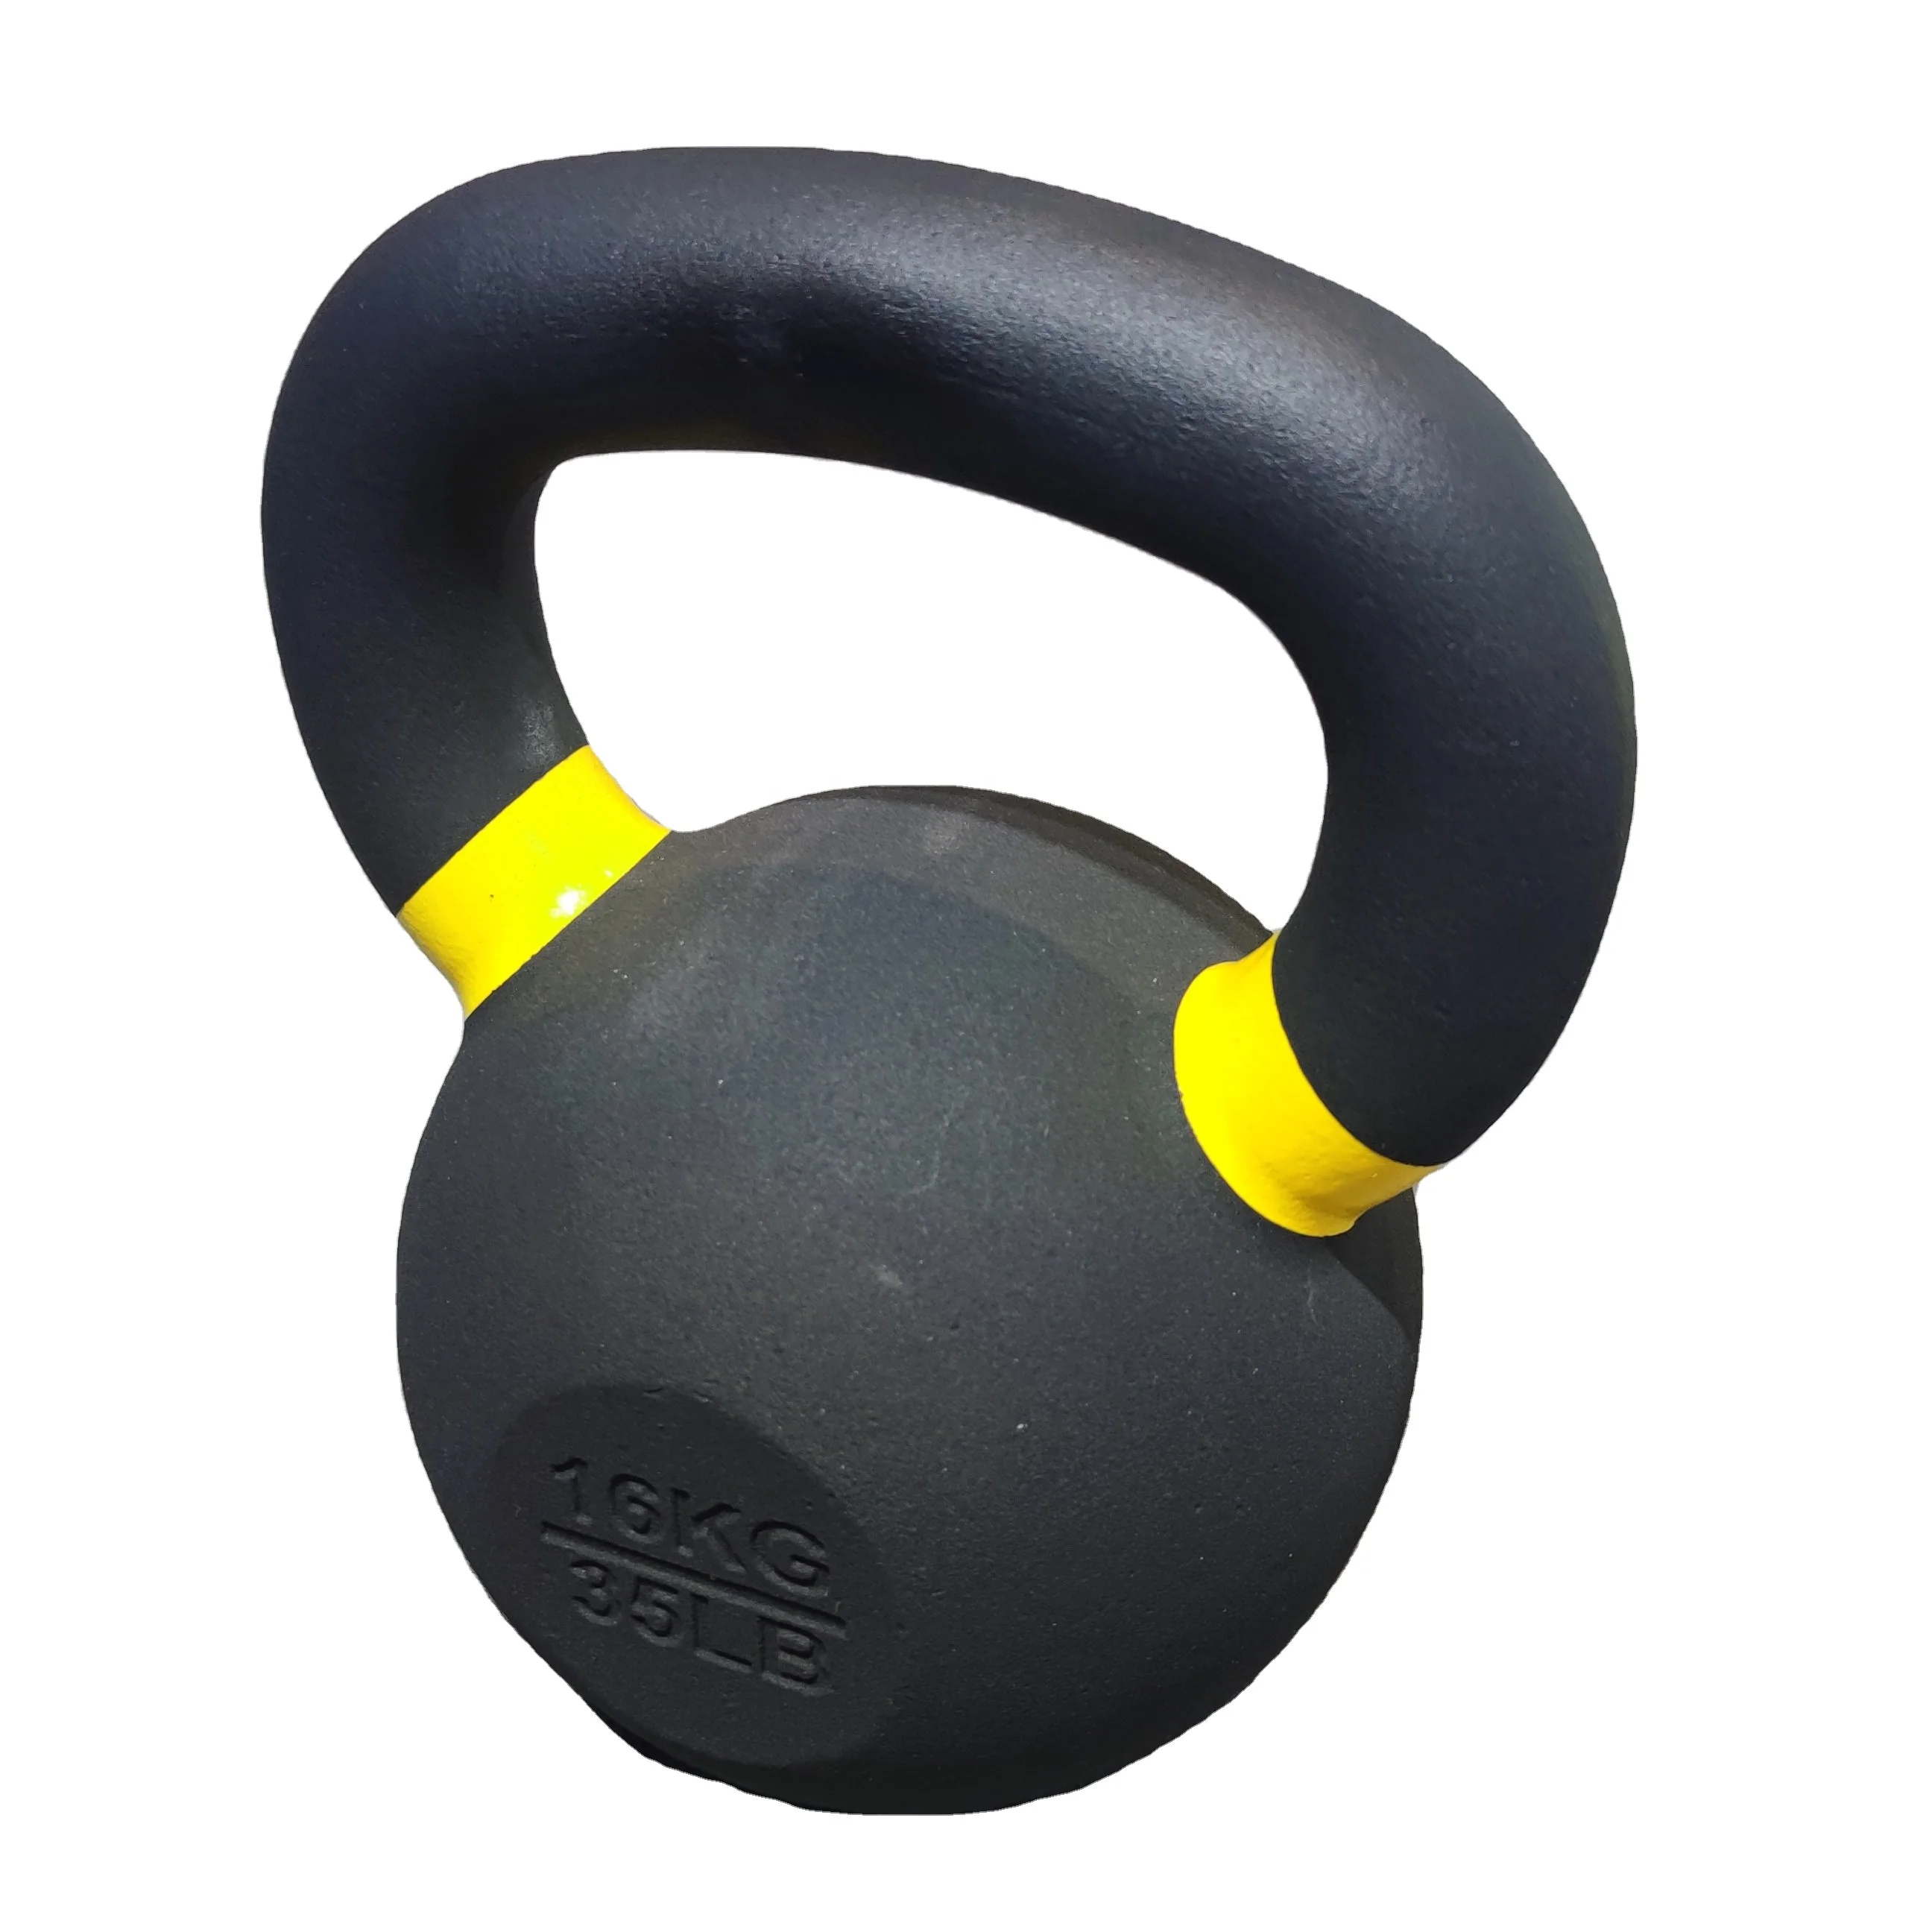 Wholesale China 50Kg/60Kg/24Kg Cast Iron Powder Coated Kettlebell Set For From m.alibaba.com